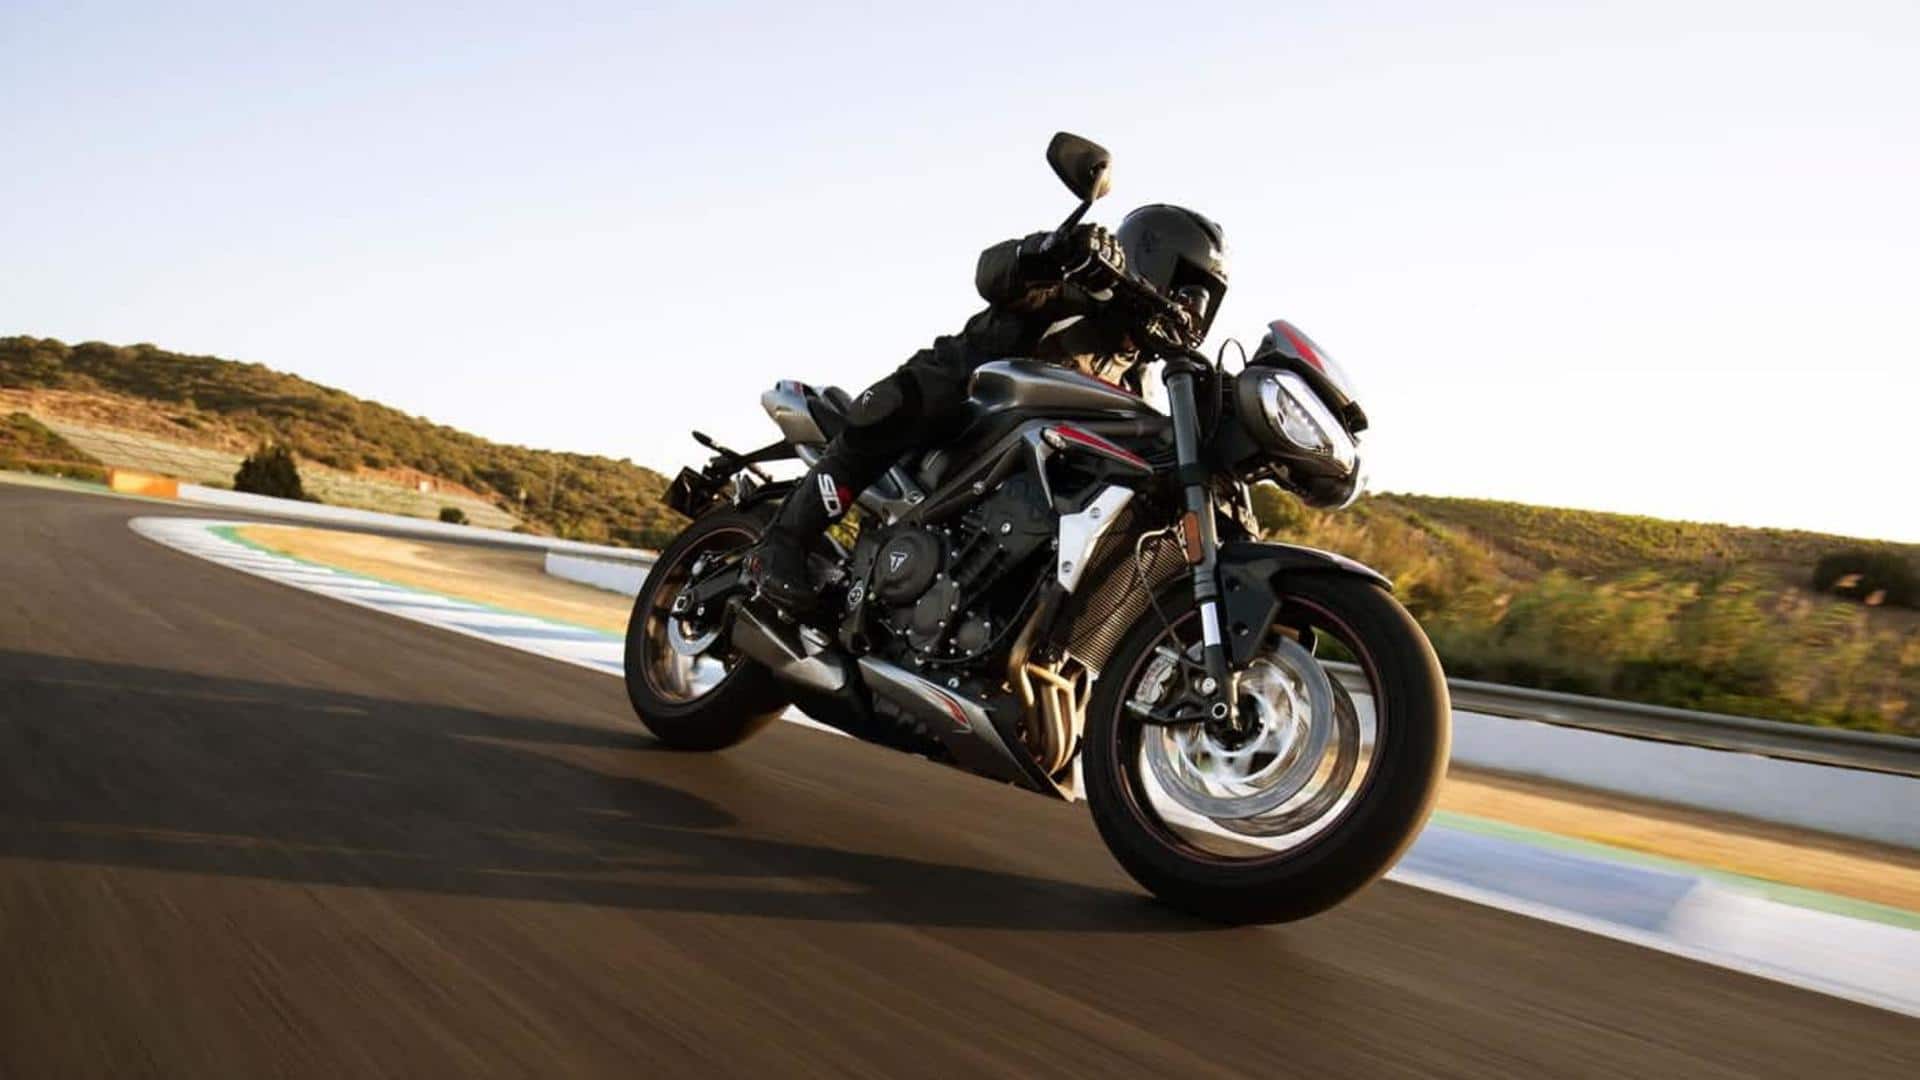 2023 Triumph Street Triple's India launch soon: Check top features